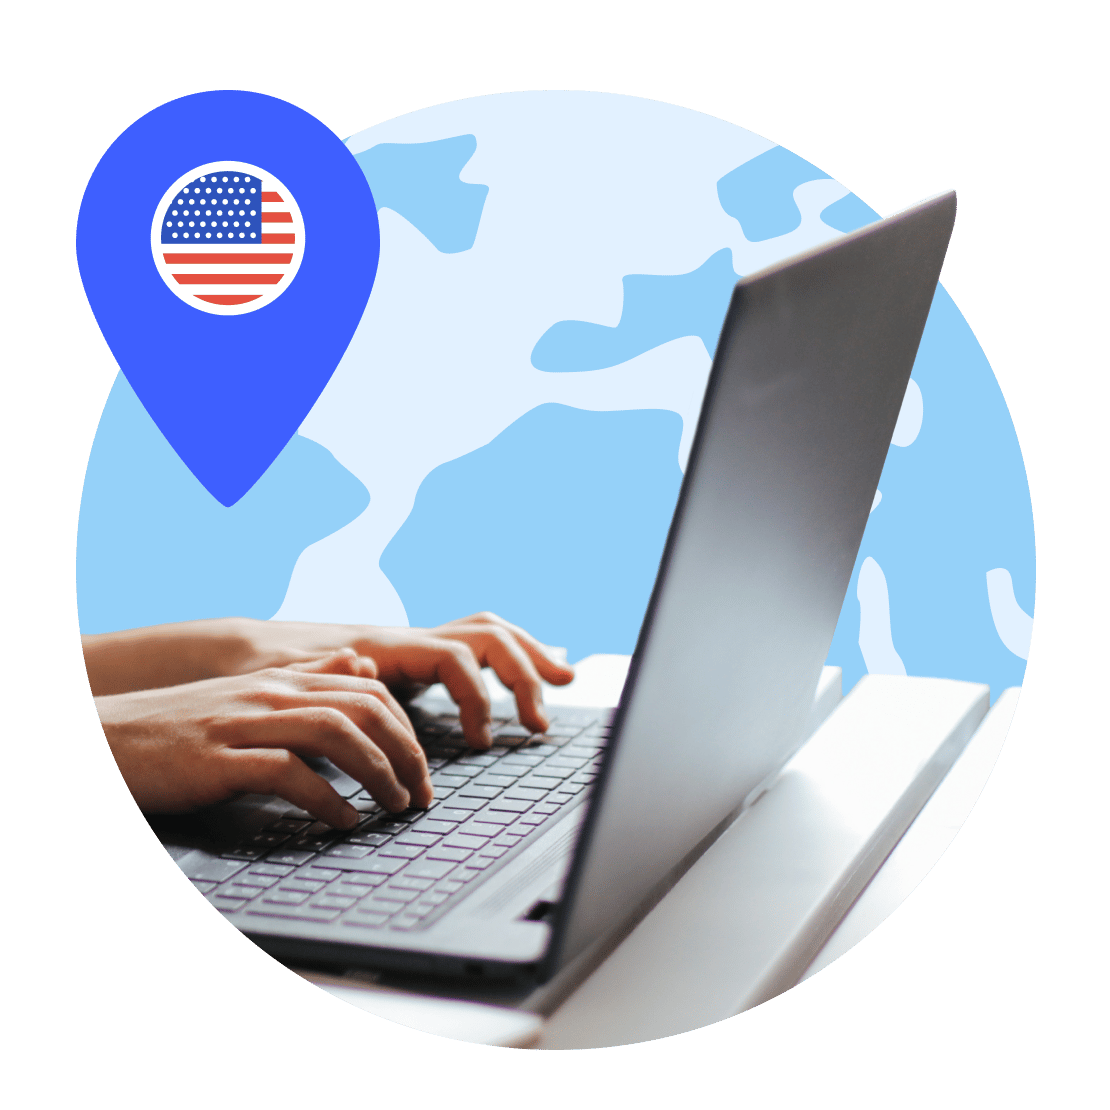 A person connects to a USA VPN server to secure their device.